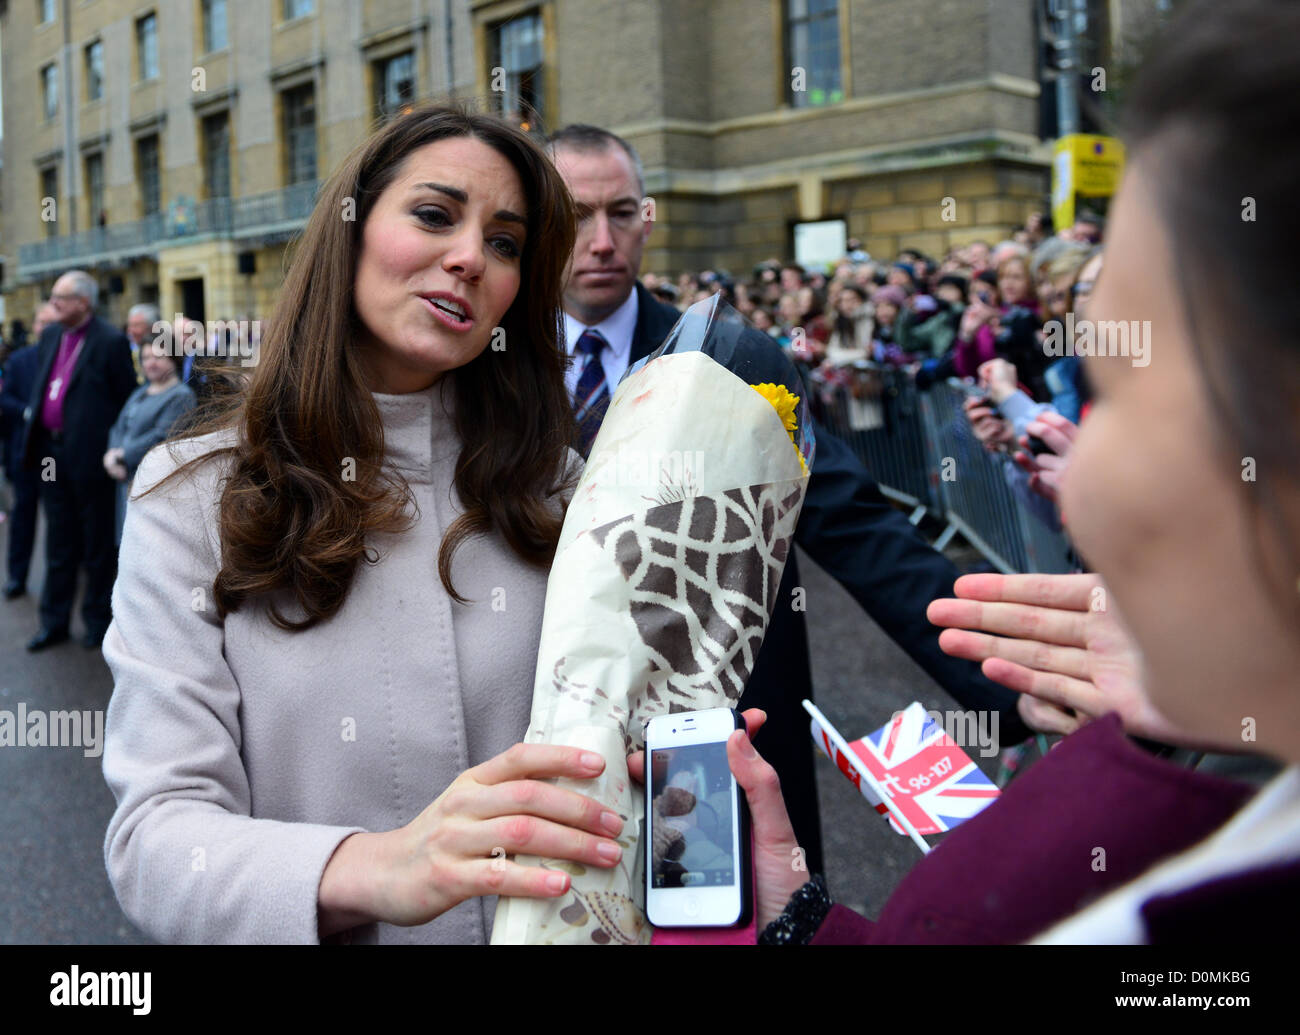 The Duke and Duchess of Cambridge on their first visit to Cambridge since their wedding. They spoke with members of public  as they walked from the Guild hall to the senate House in Cambridge City Center Stock Photo